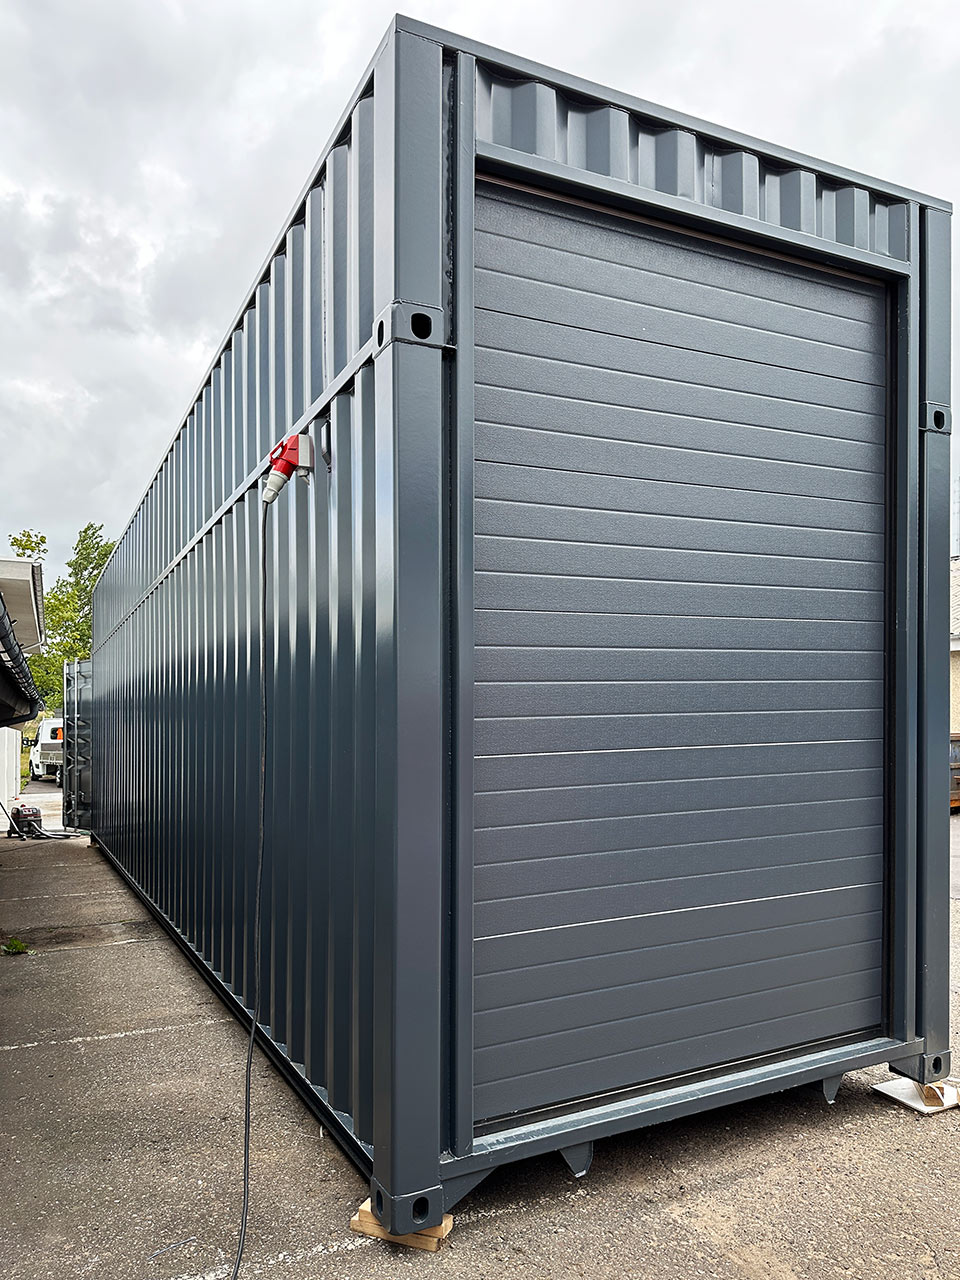 Extra high custom-built 40-ft High Cube container: Tailored for industrial excellence